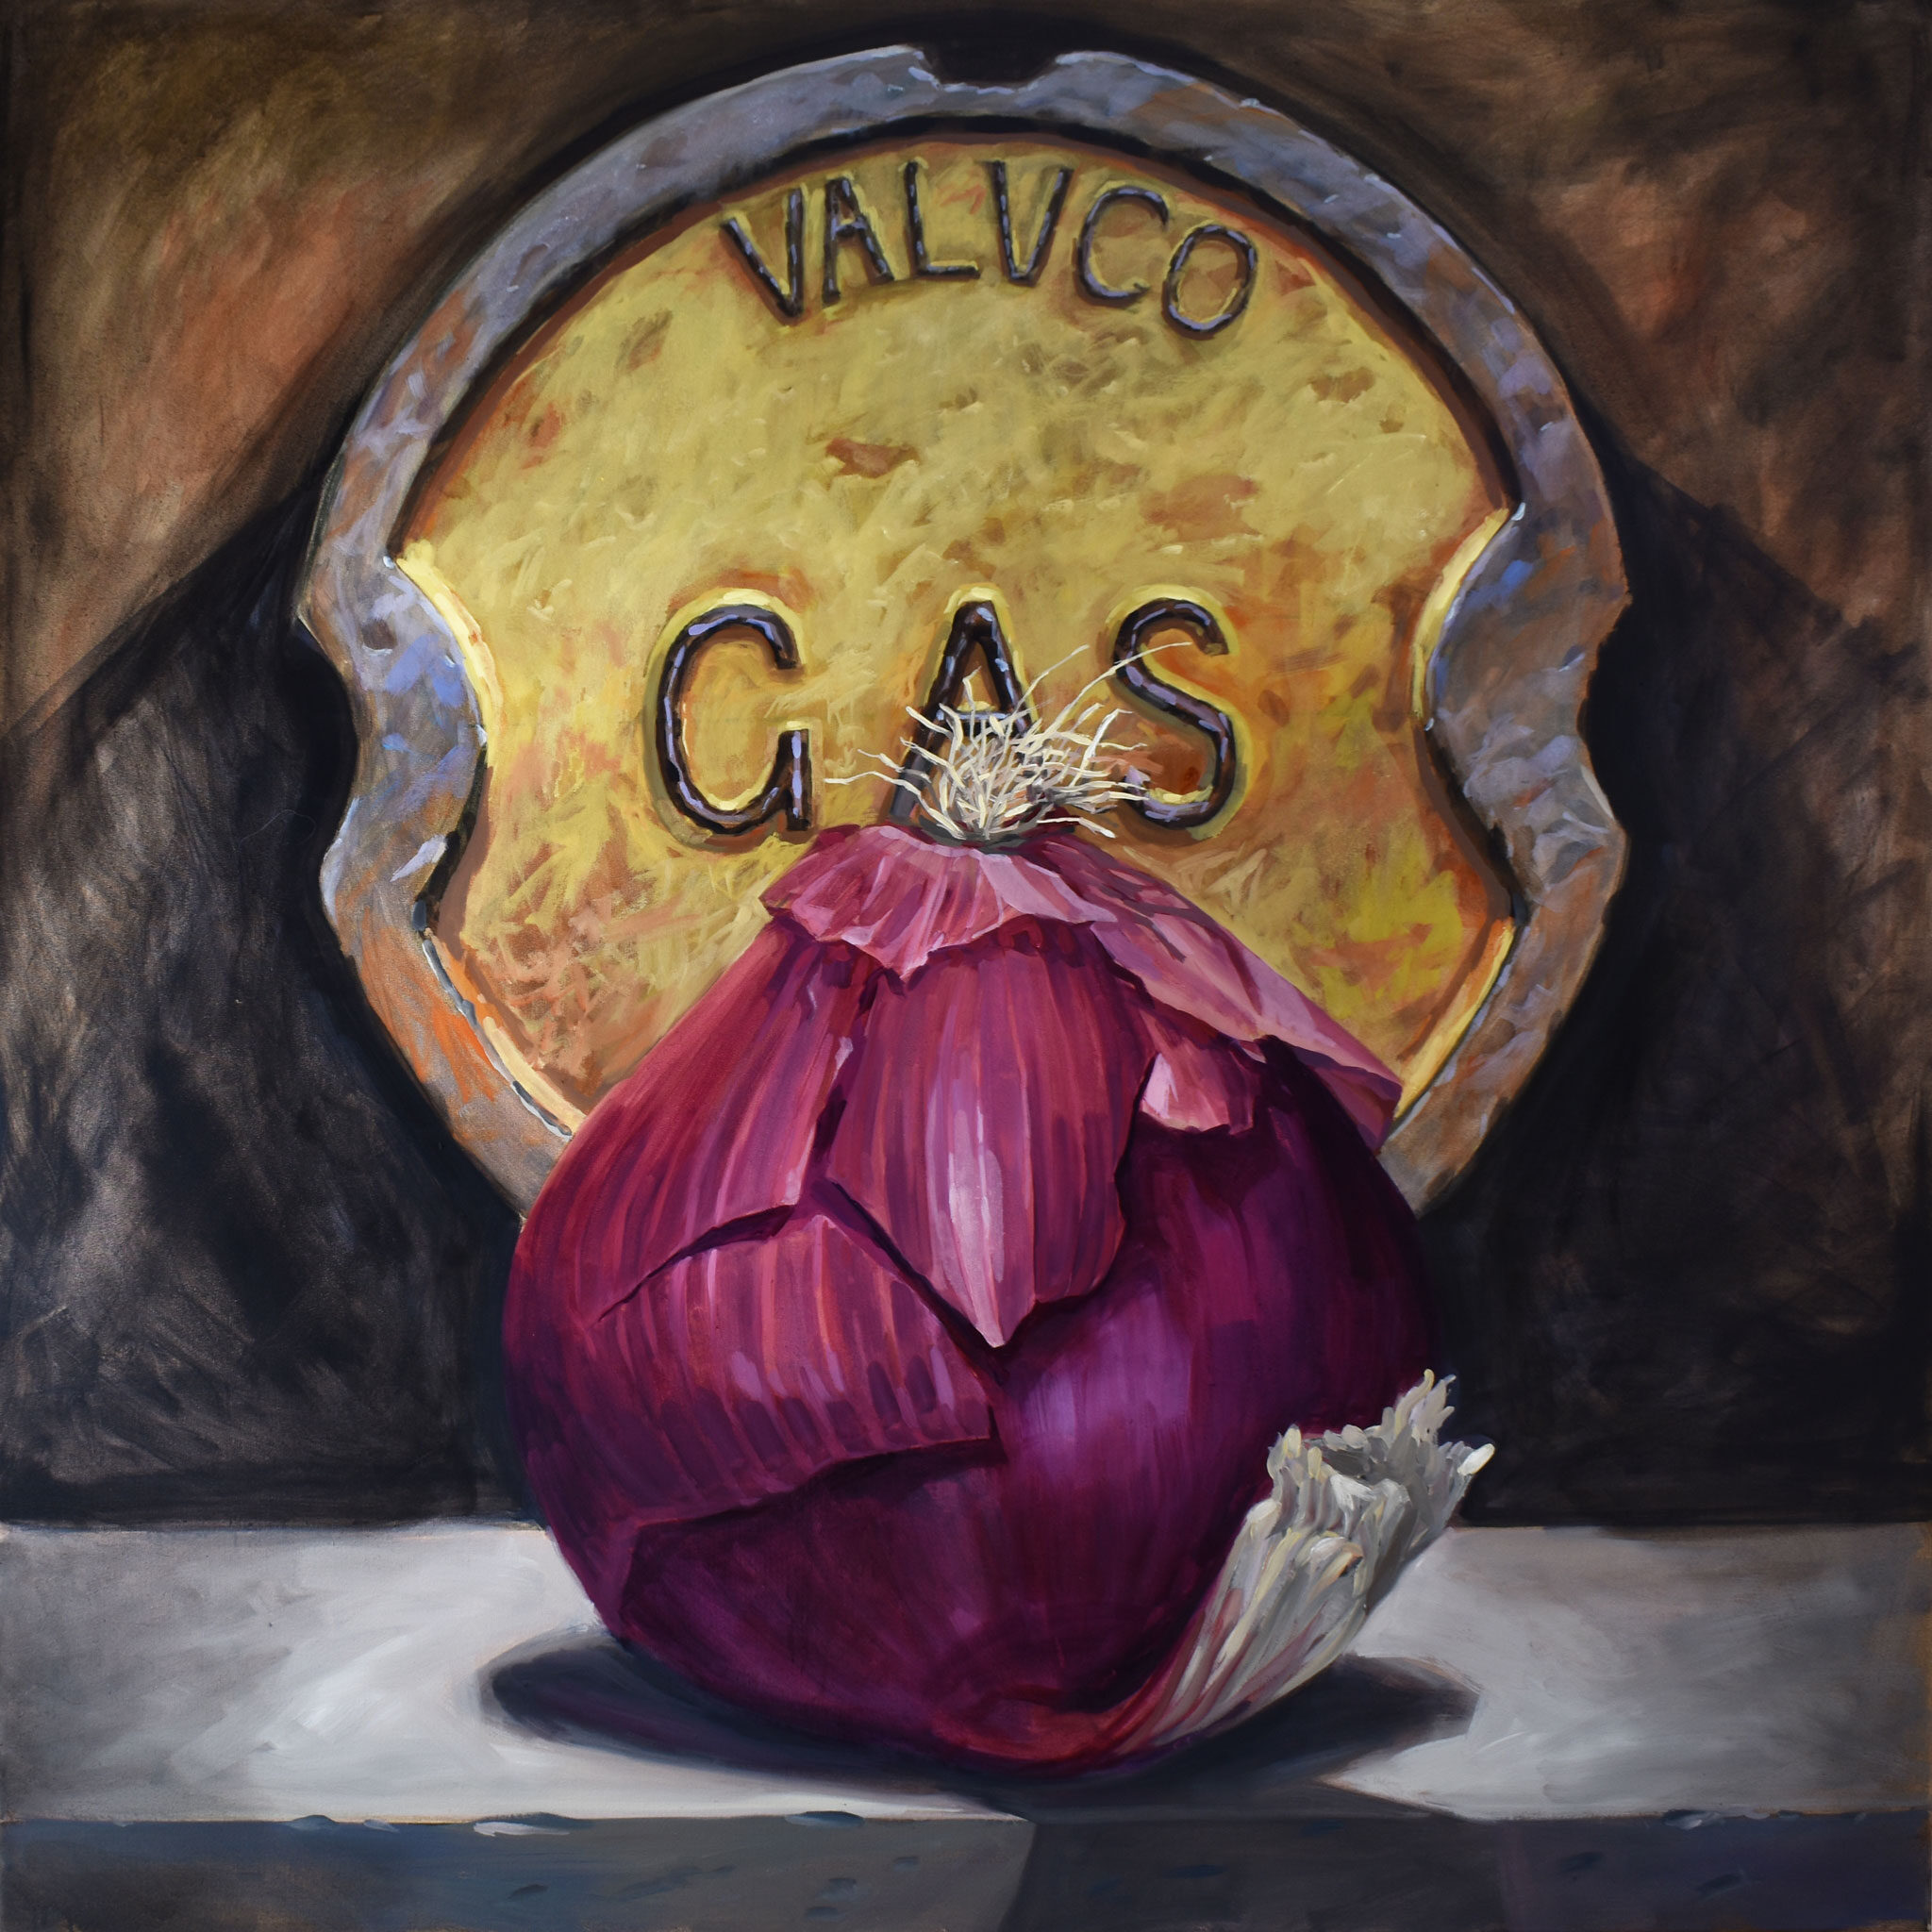 Gas & Red Onion by Brian McClear